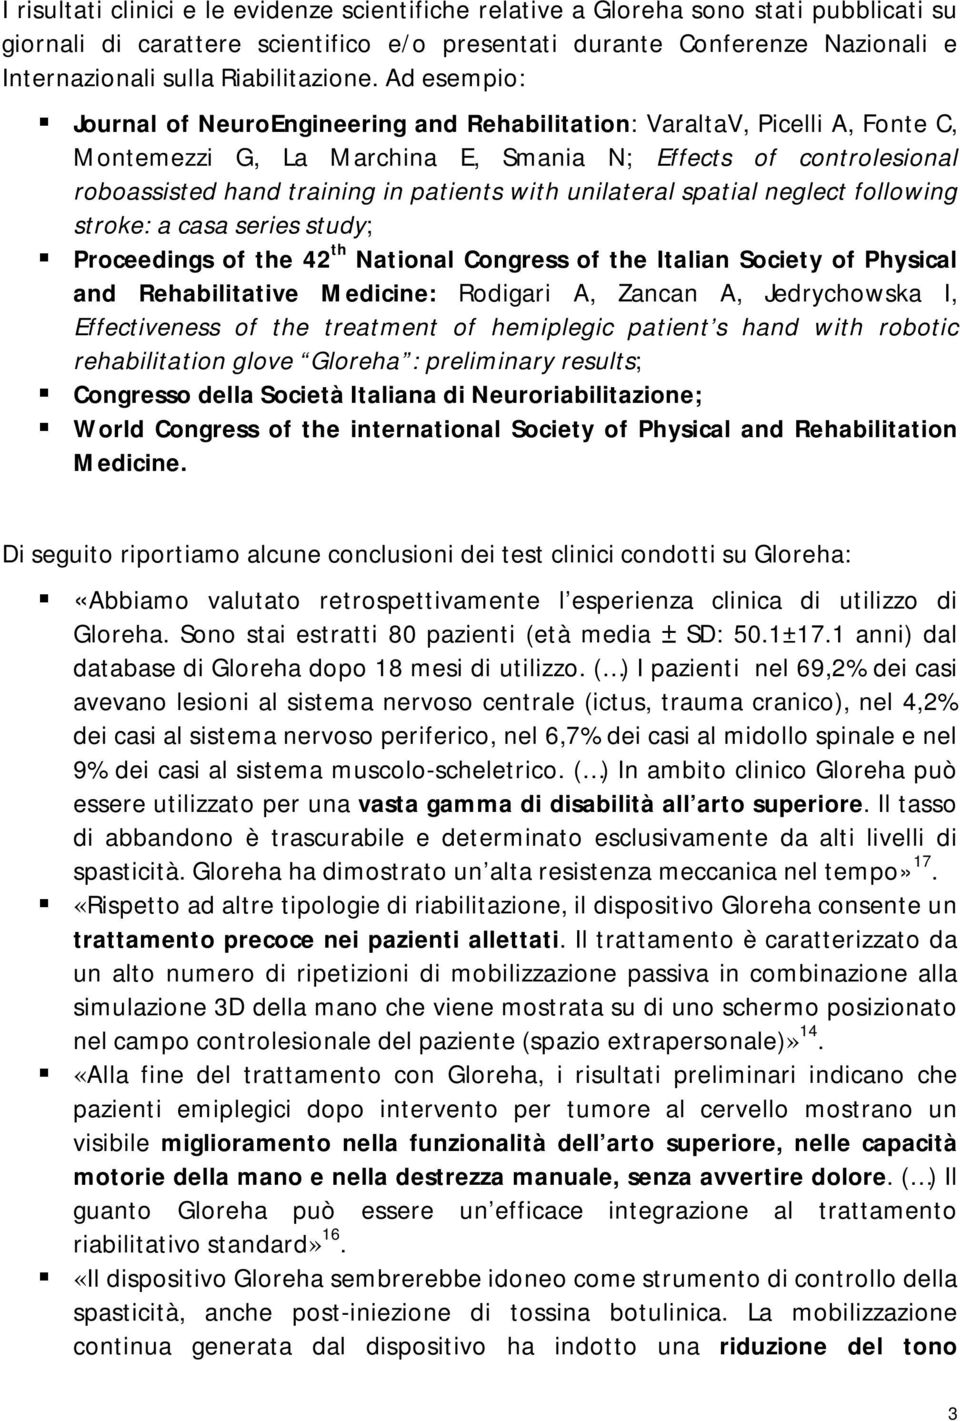 Ad esempio: Journal of NeuroEngineering and Rehabilitation: VaraltaV, Picelli A, Fonte C, Montemezzi G, La Marchina E, Smania N; Effects of controlesional roboassisted hand training in patients with